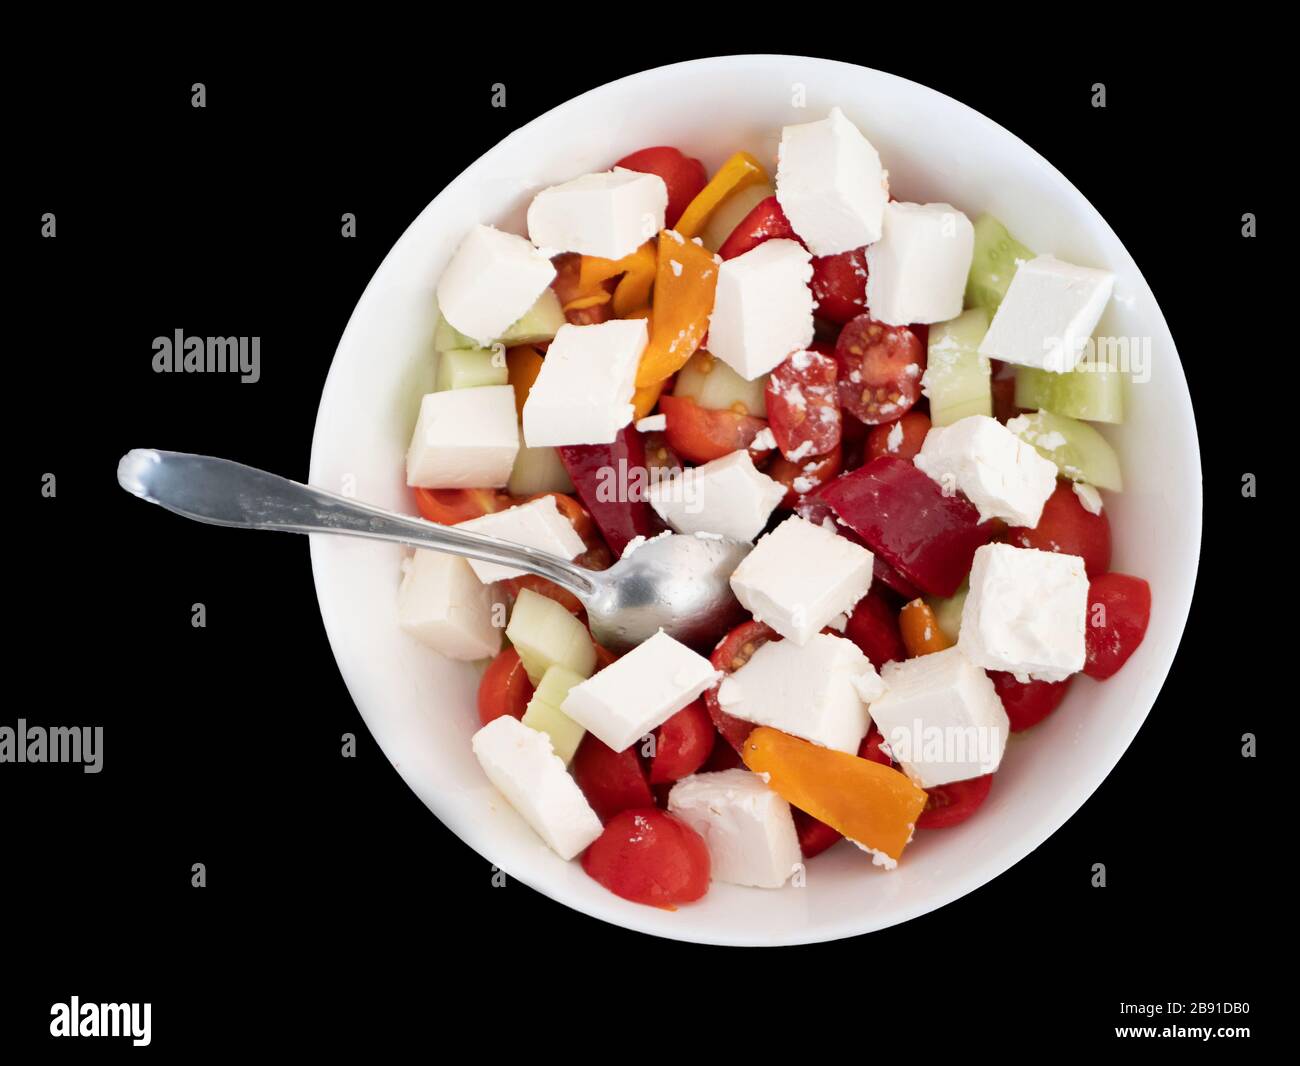 white bowl of greek salad isolated cutout on black bakground. red tomatoes, feta cheese, cucumbers, bulgarian pepper. Stock Photo